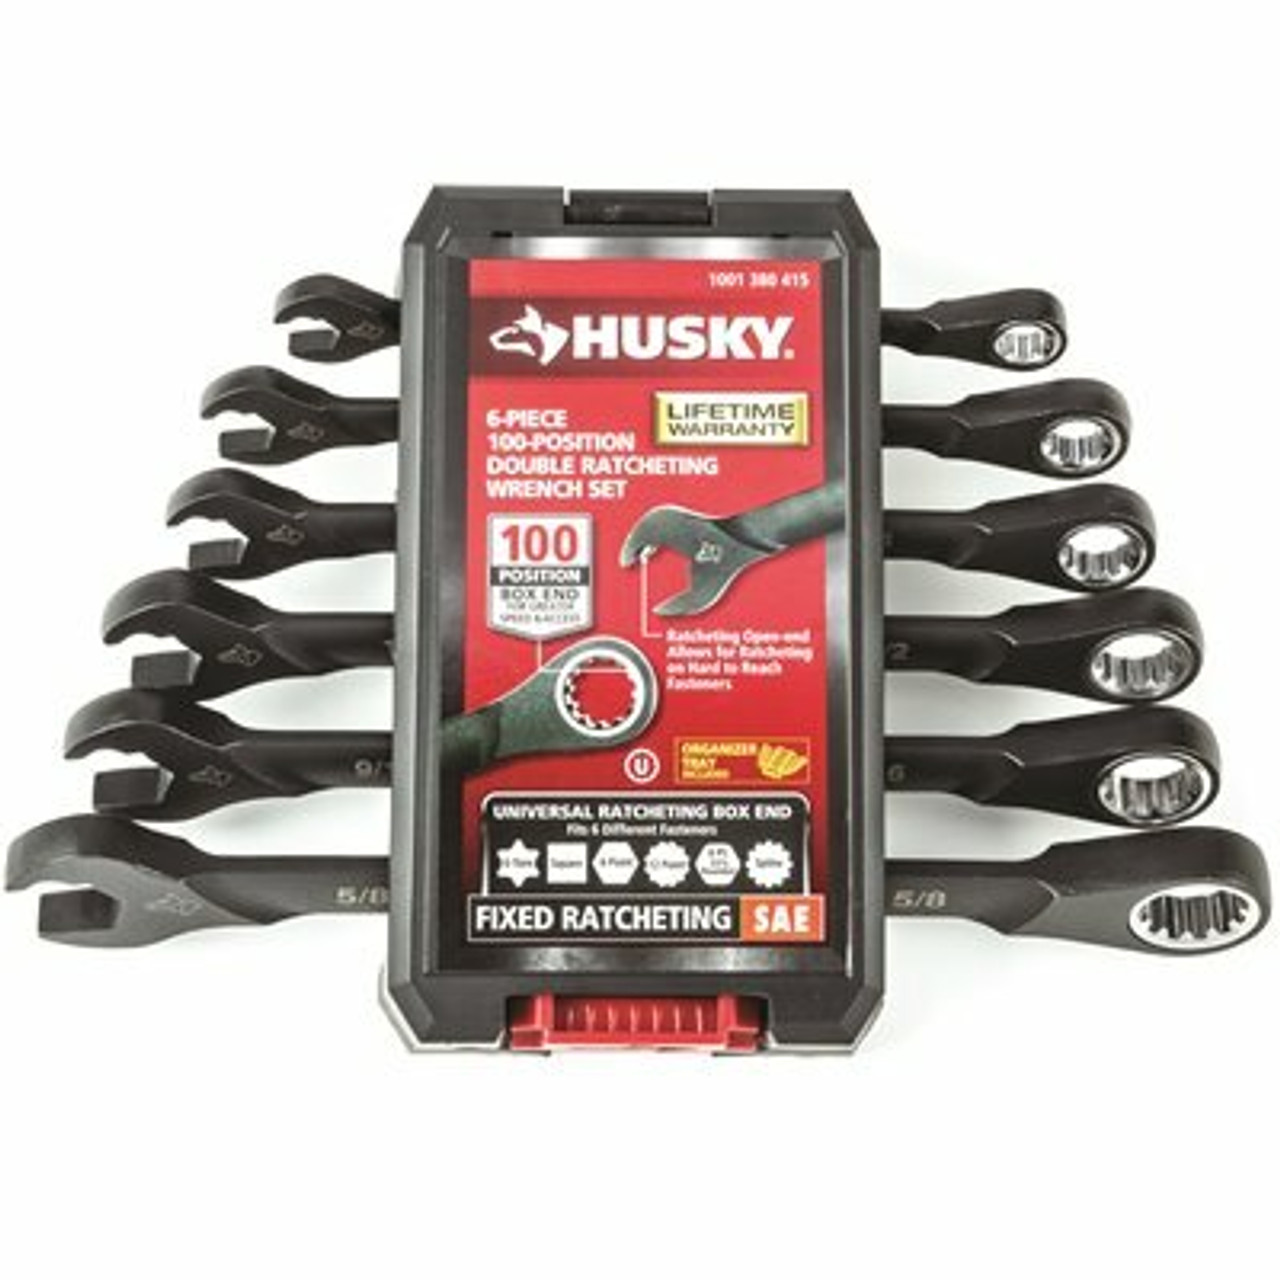 Husky 100-Position Double Ratcheting Sae Wrench Set (6-Piece)